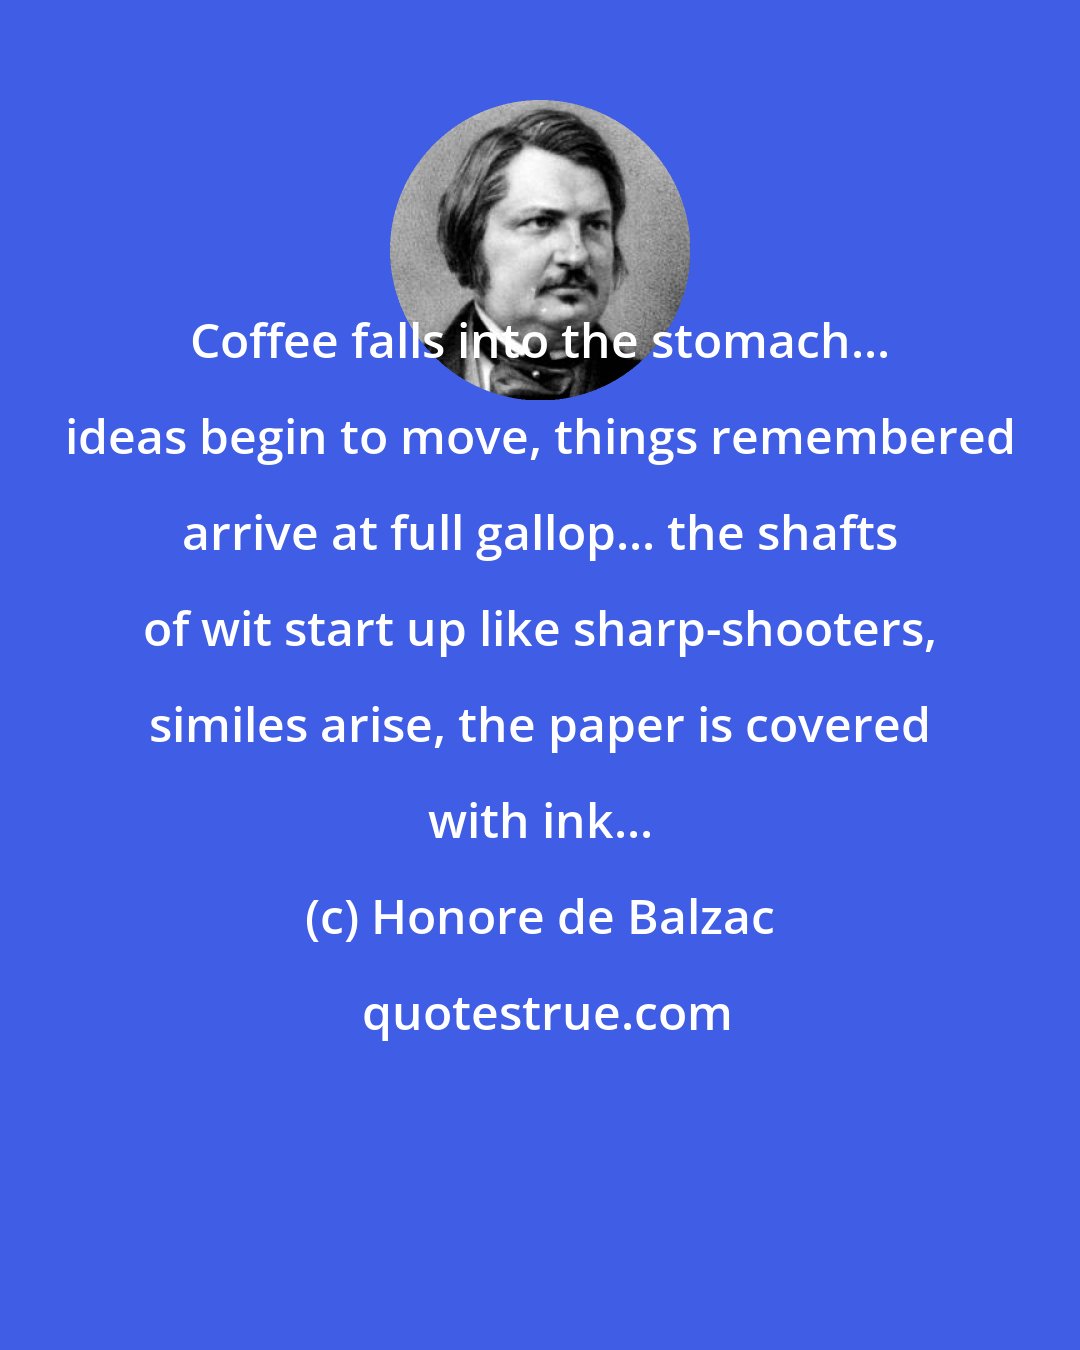 Honore de Balzac: Coffee falls into the stomach... ideas begin to move, things remembered arrive at full gallop... the shafts of wit start up like sharp-shooters, similes arise, the paper is covered with ink...